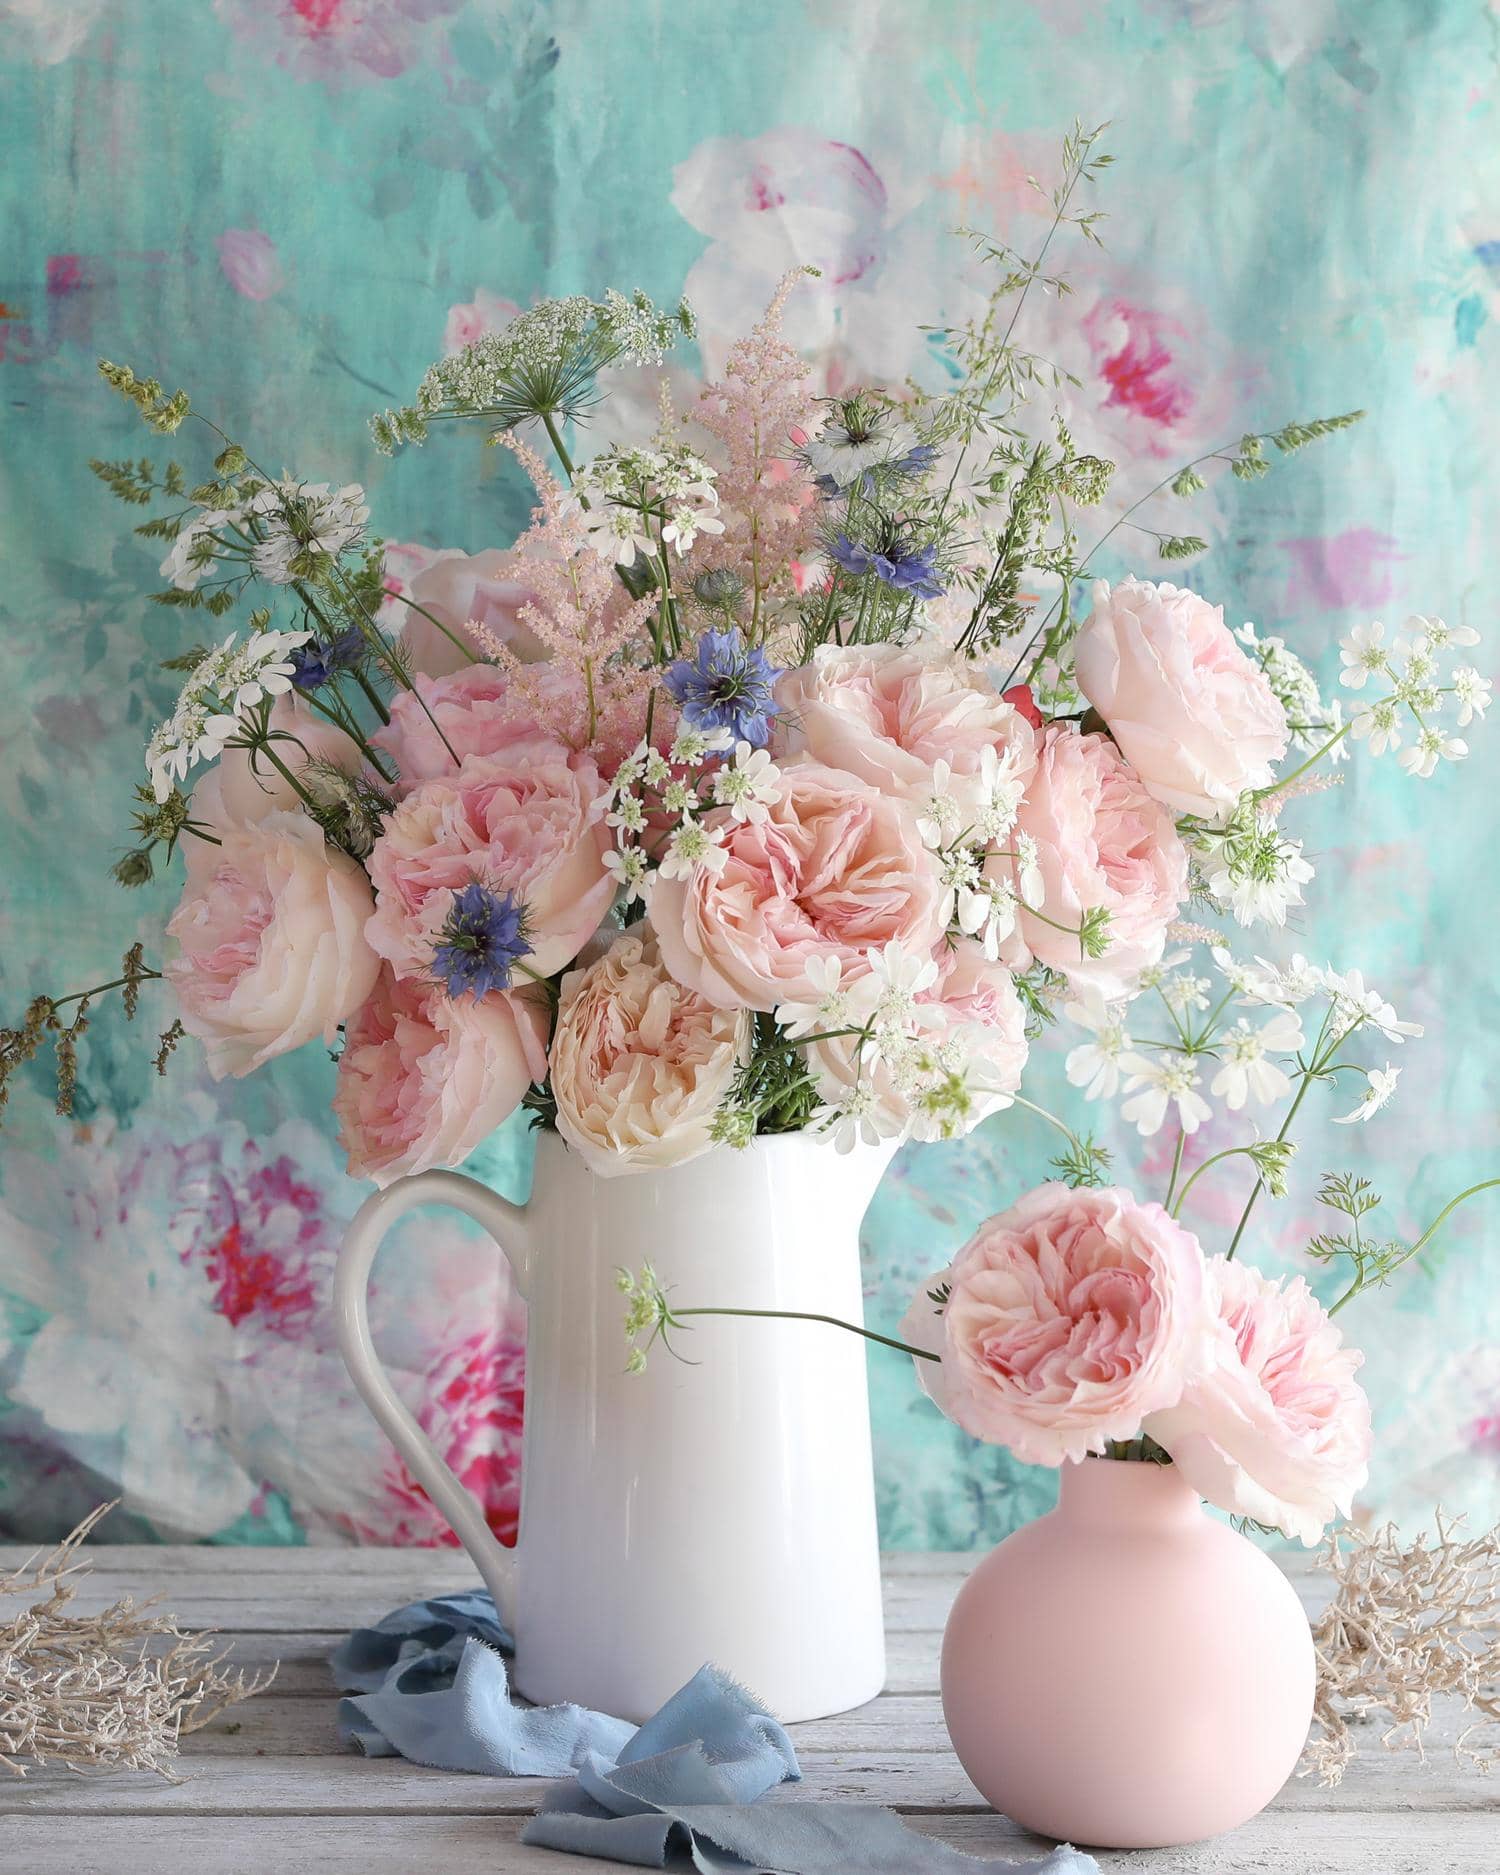 Rose Styling for Summer - David Austin Wedding and Event Roses